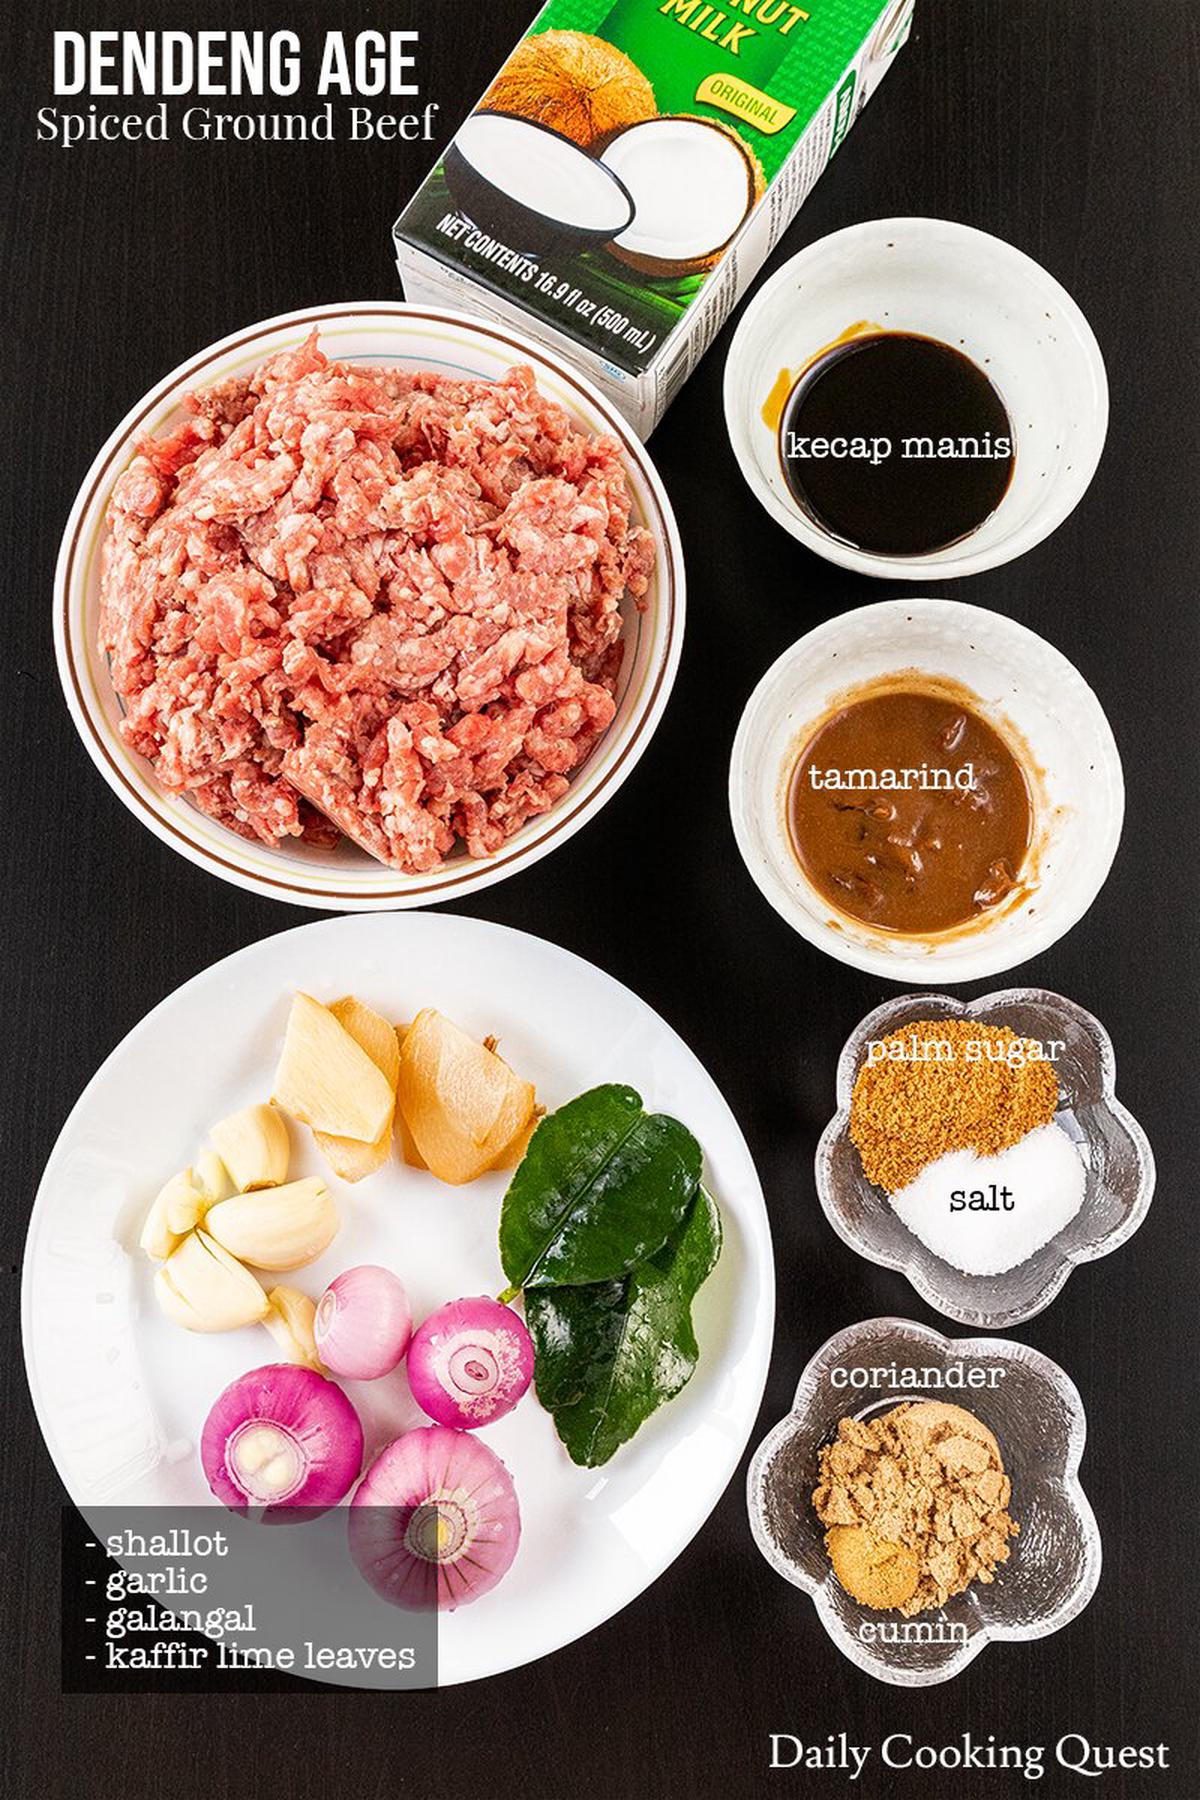 Ingredients to prepare Indonesian dendeng age (spiced ground beef).